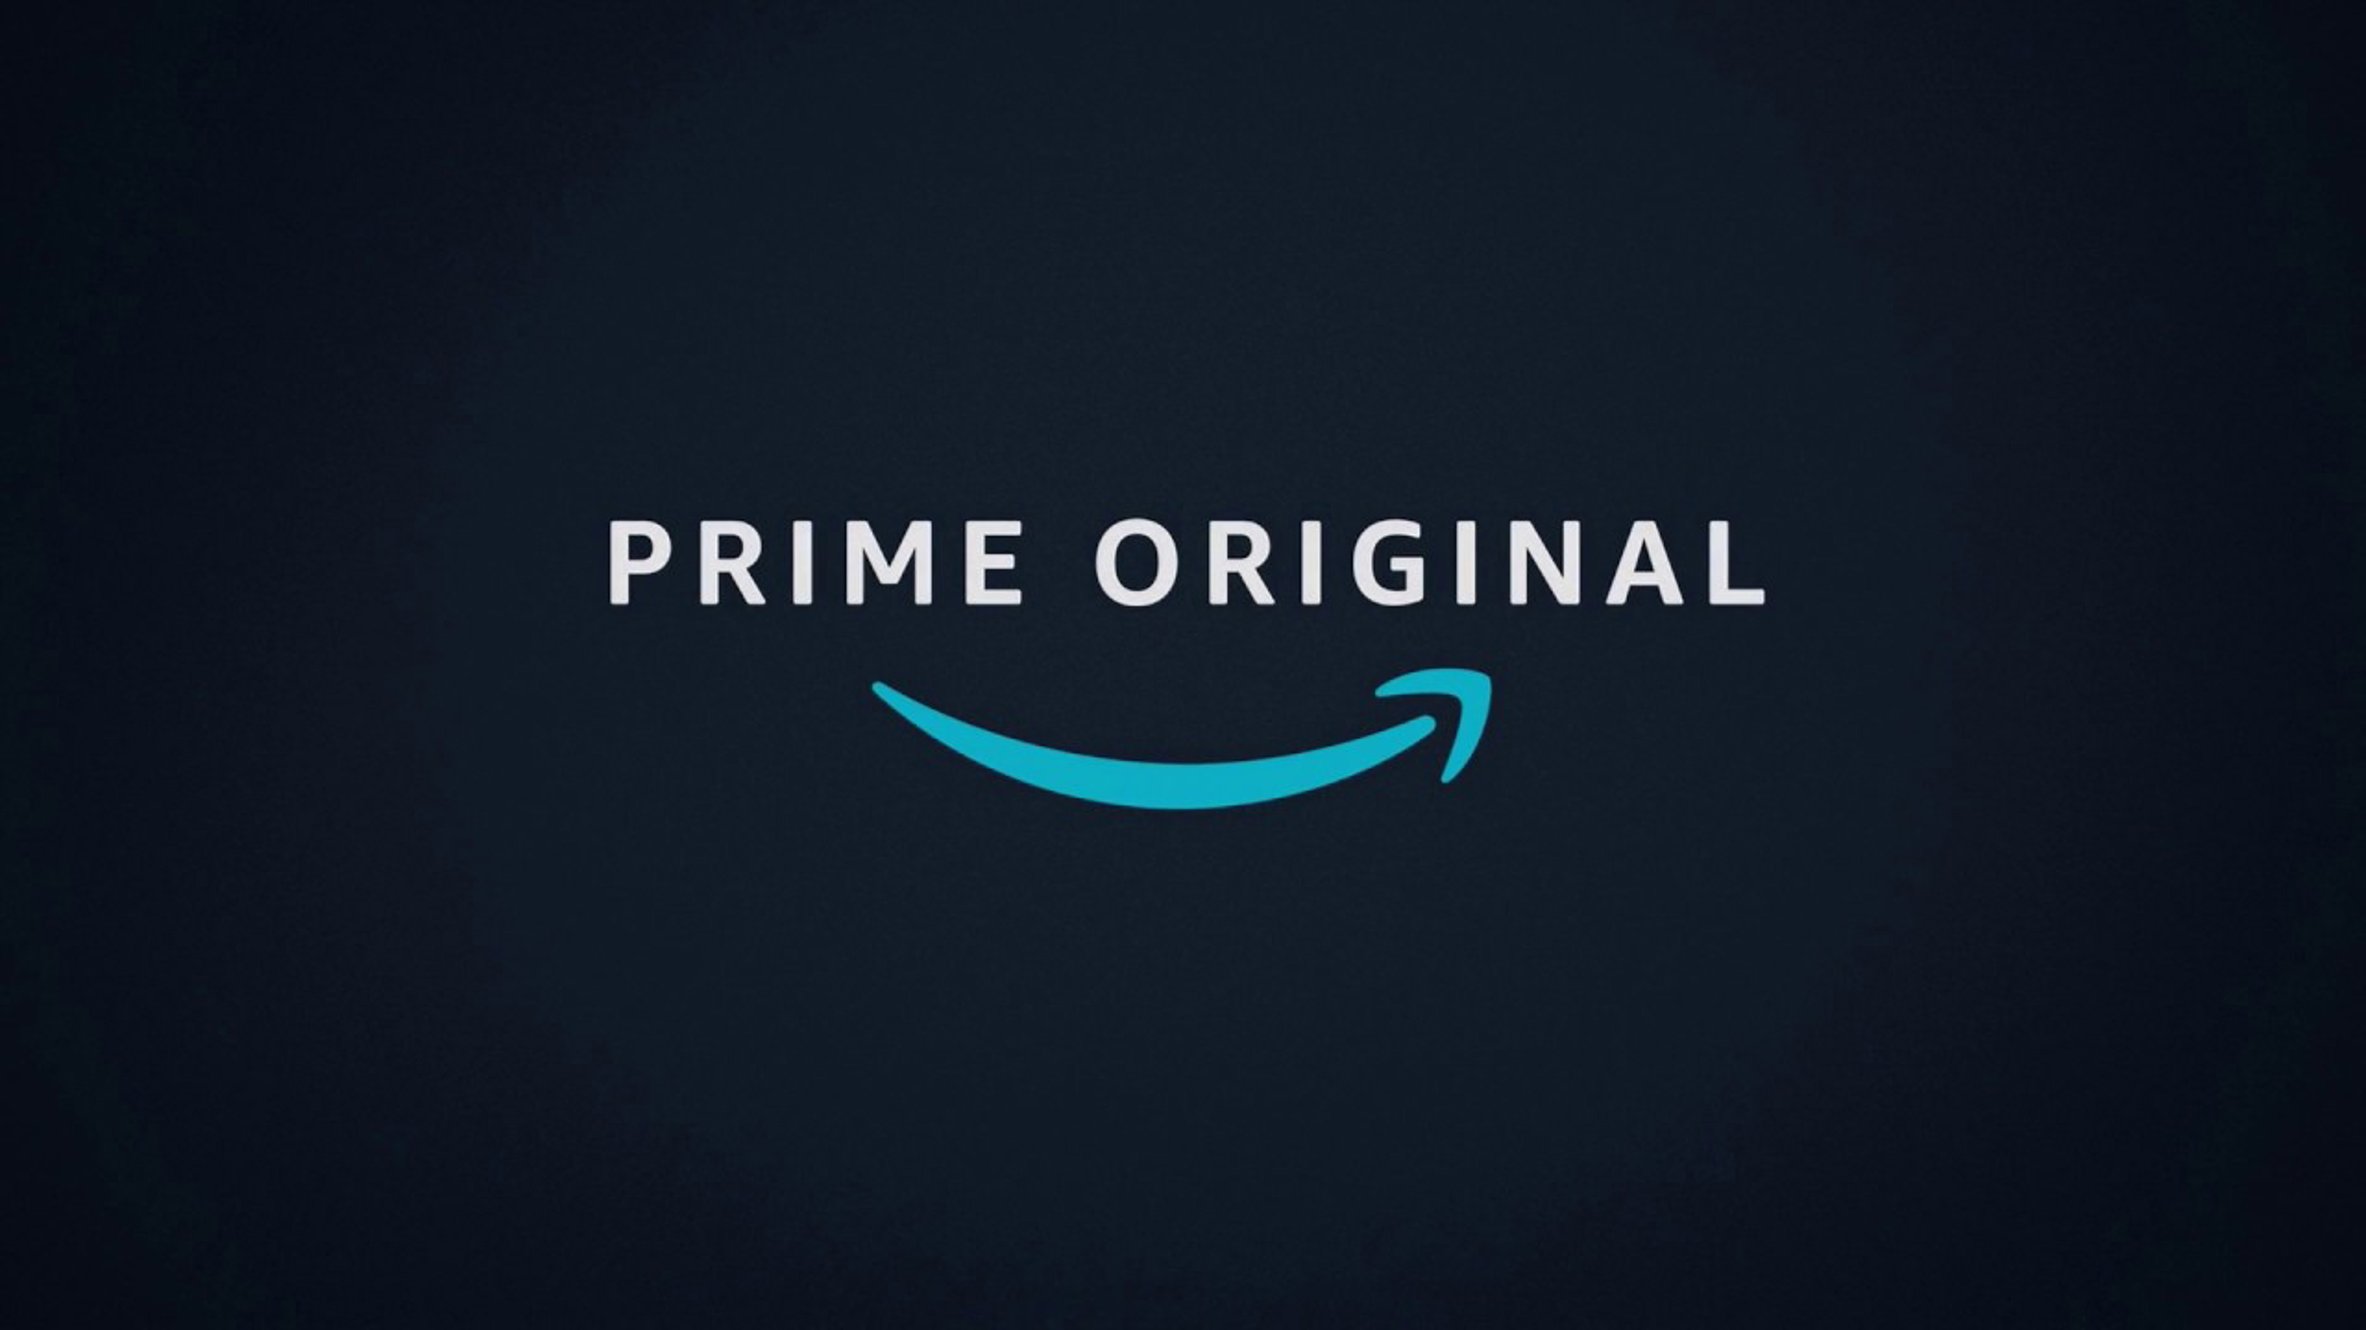 Casting Speaking Role's For Amazon's New Feature Film!